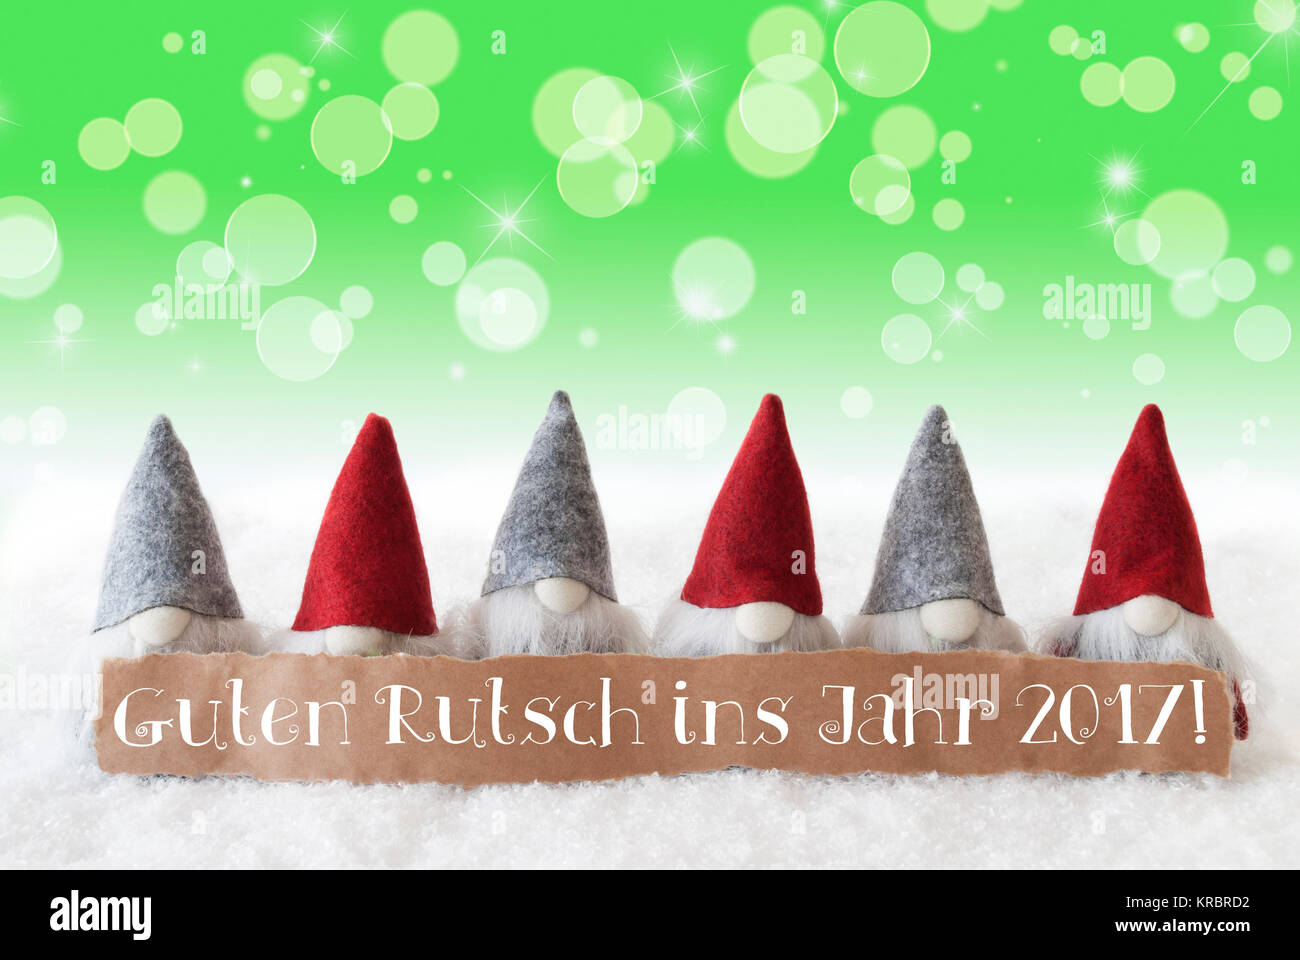 Label With German Text Guten Rutsch Ins Jahr 2017 Means Happy New Year 2017. Christmas Greeting Card With Gnomes. Sparkling Bokeh And Green Background With Snow And Stars. Stock Photo